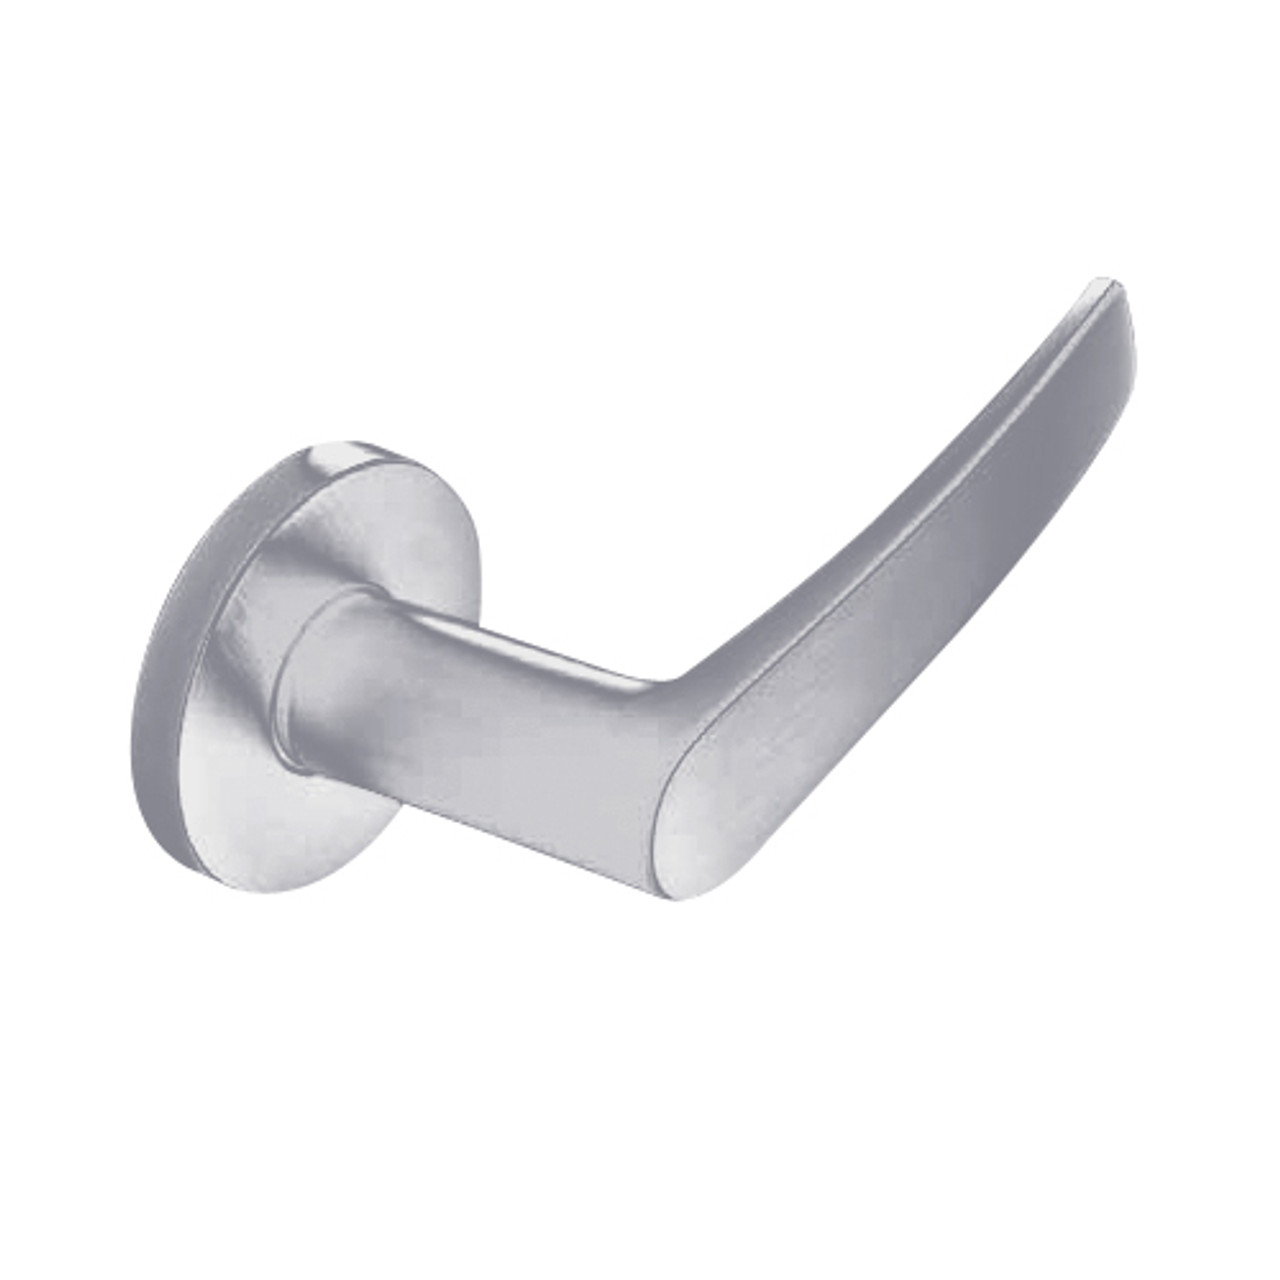 ML2054-ASB-626 Corbin Russwin ML2000 Series Mortise Entrance Locksets with Armstrong Lever in Satin Chrome